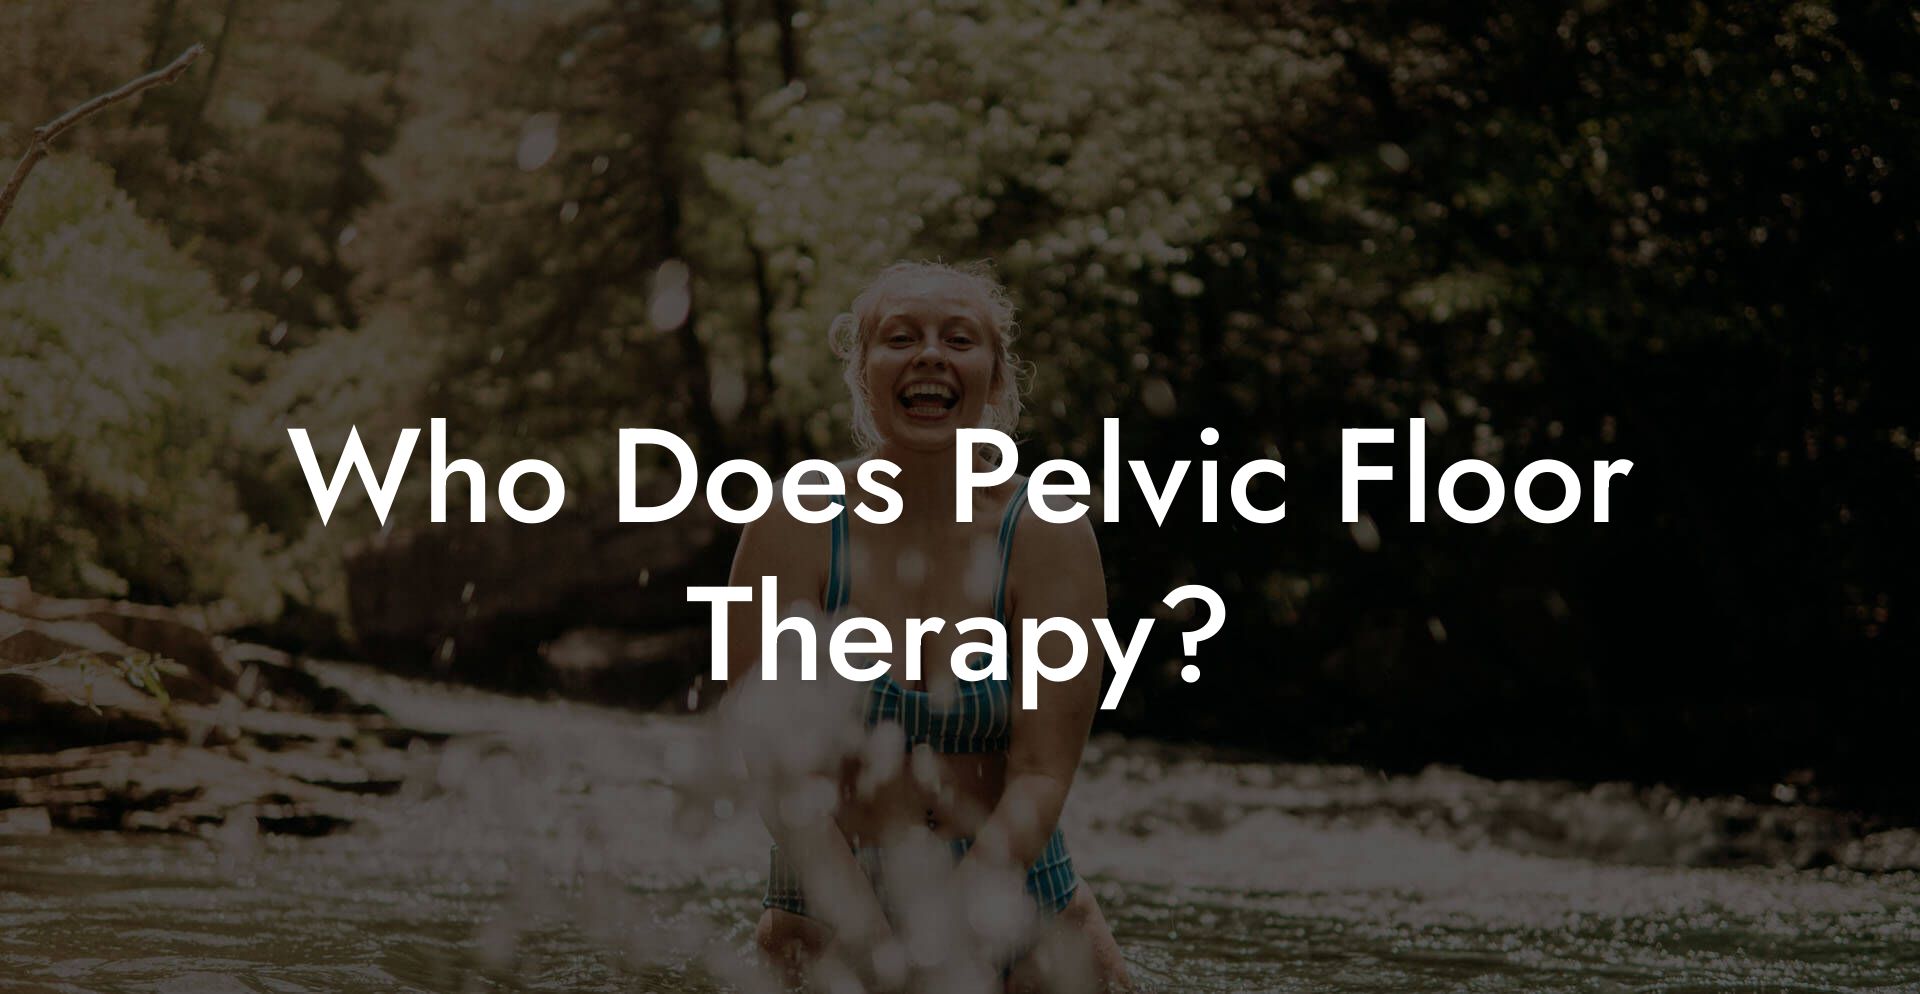 Who Does Pelvic Floor Therapy?